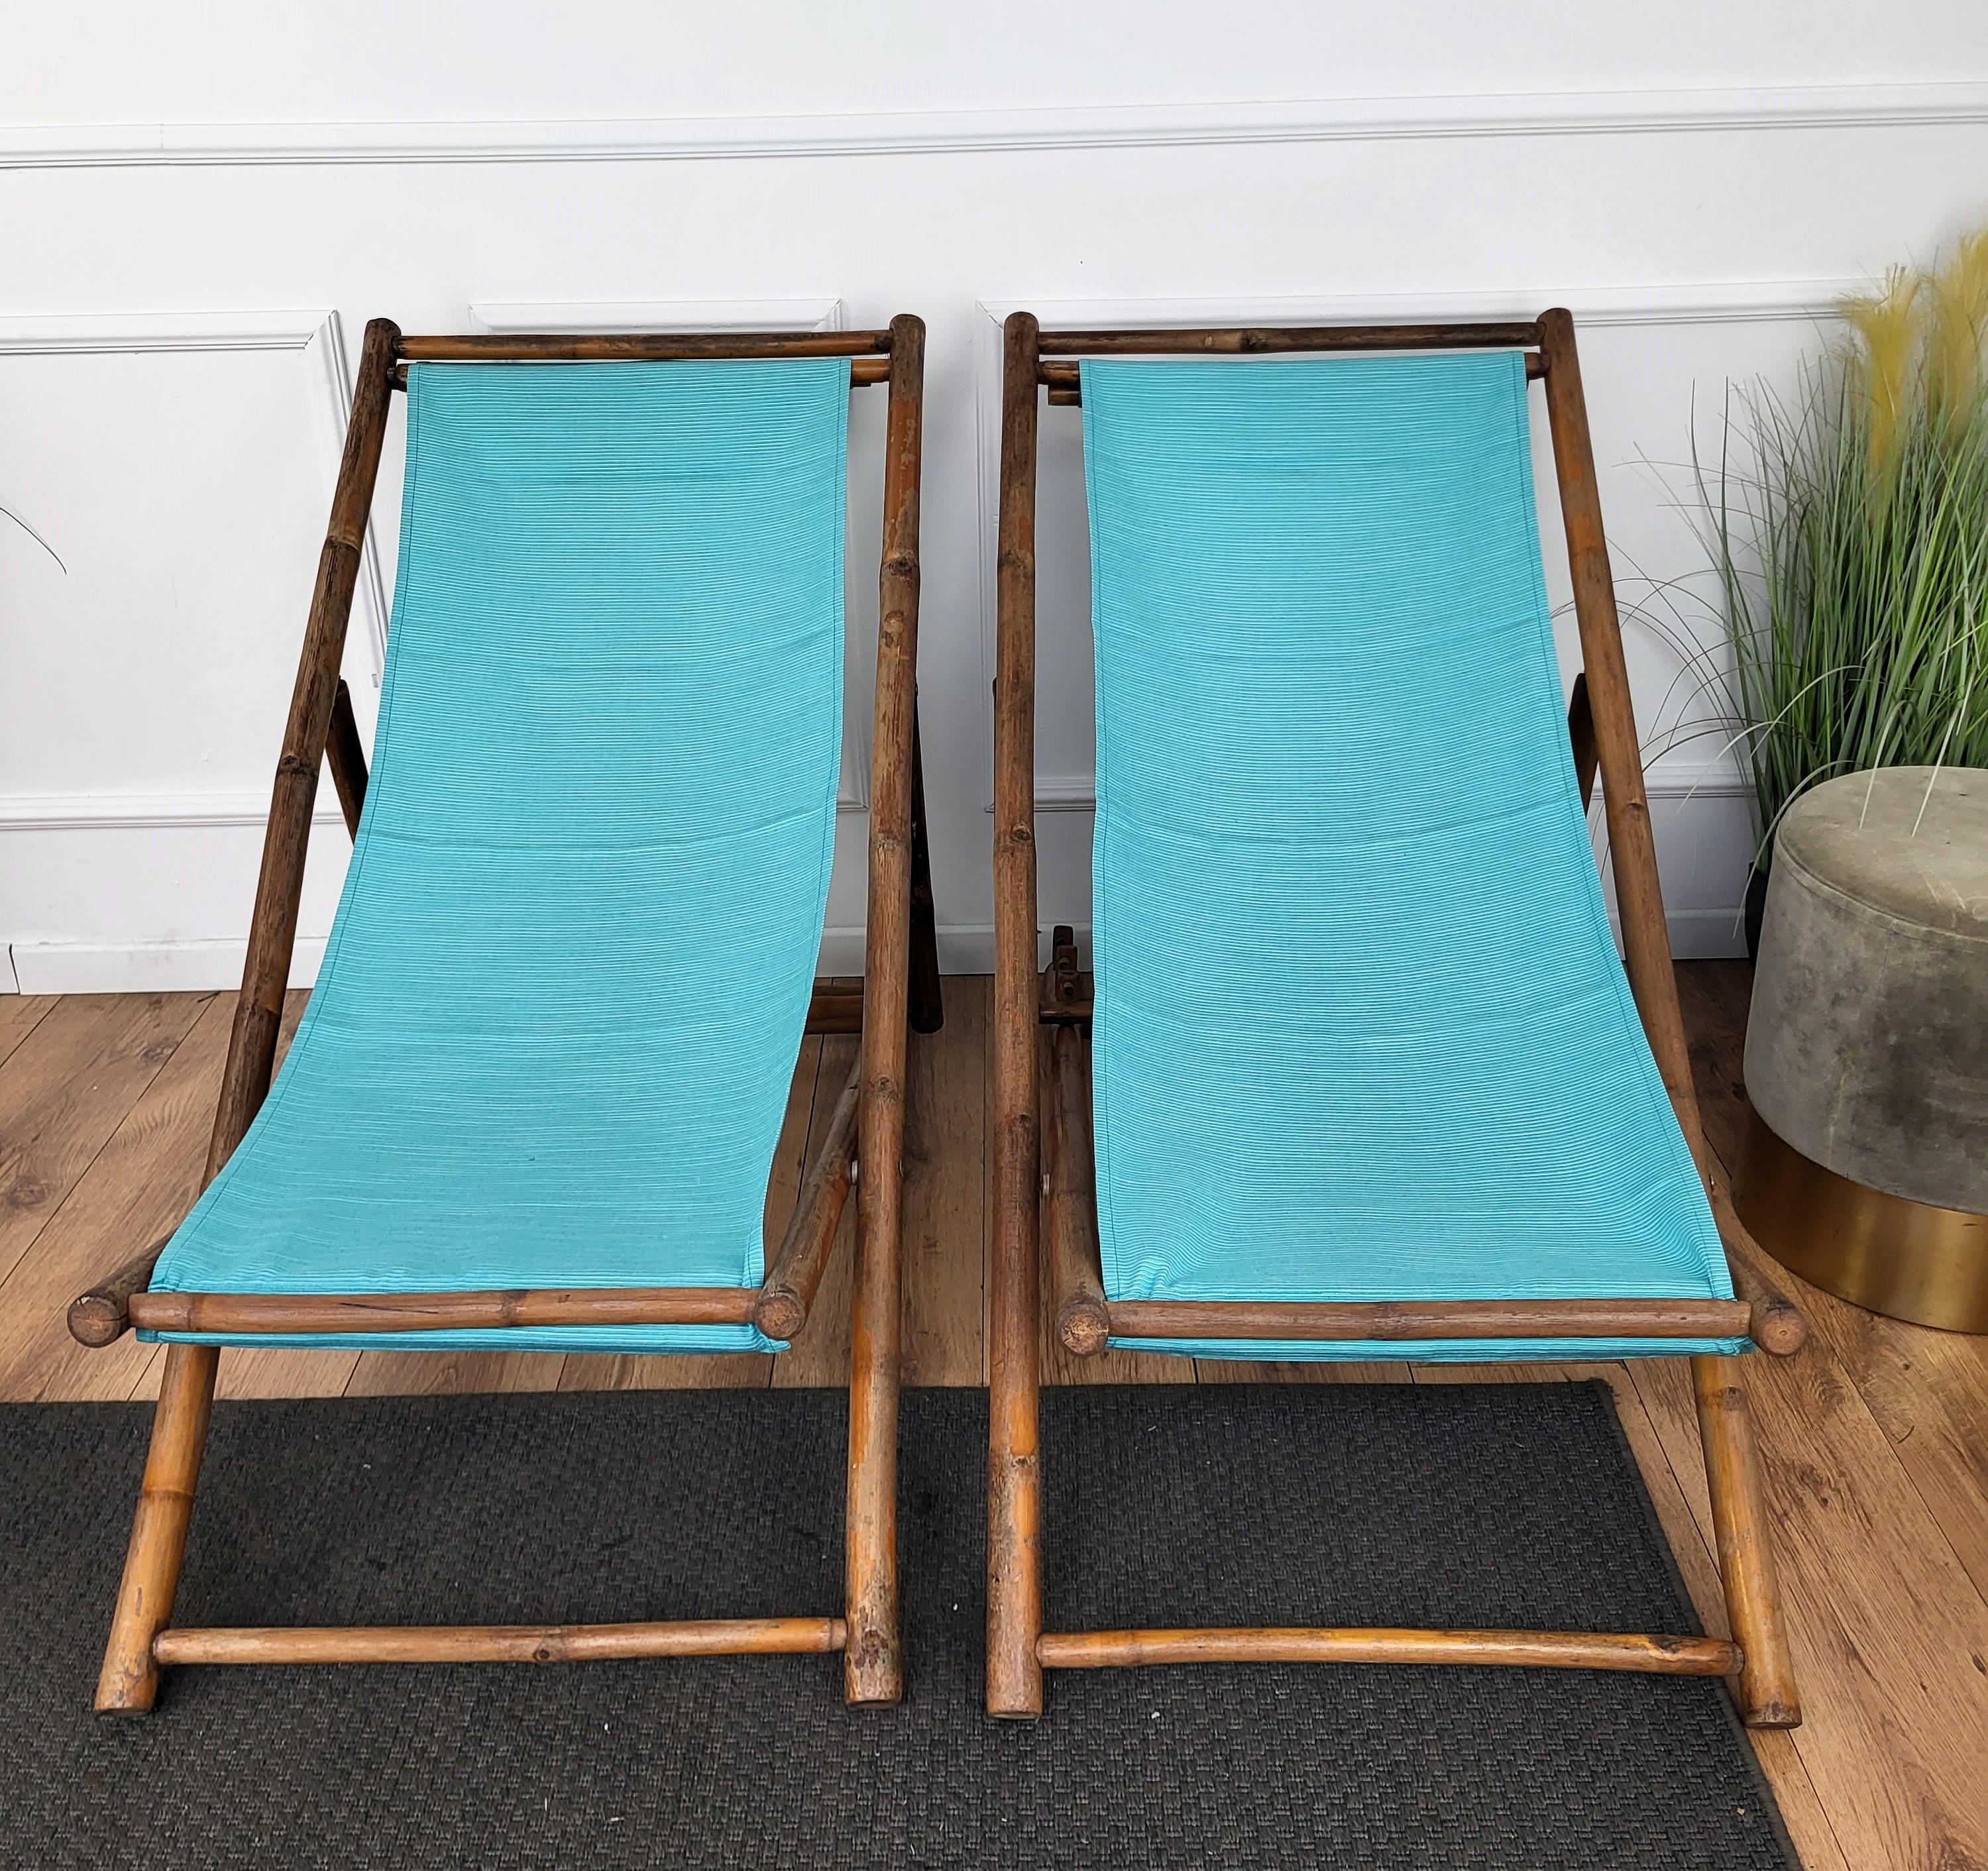 Italian Transat Folding Deck Chair Patio Lounger, Chaise Longue, Bambo Wood and Fabric For Sale